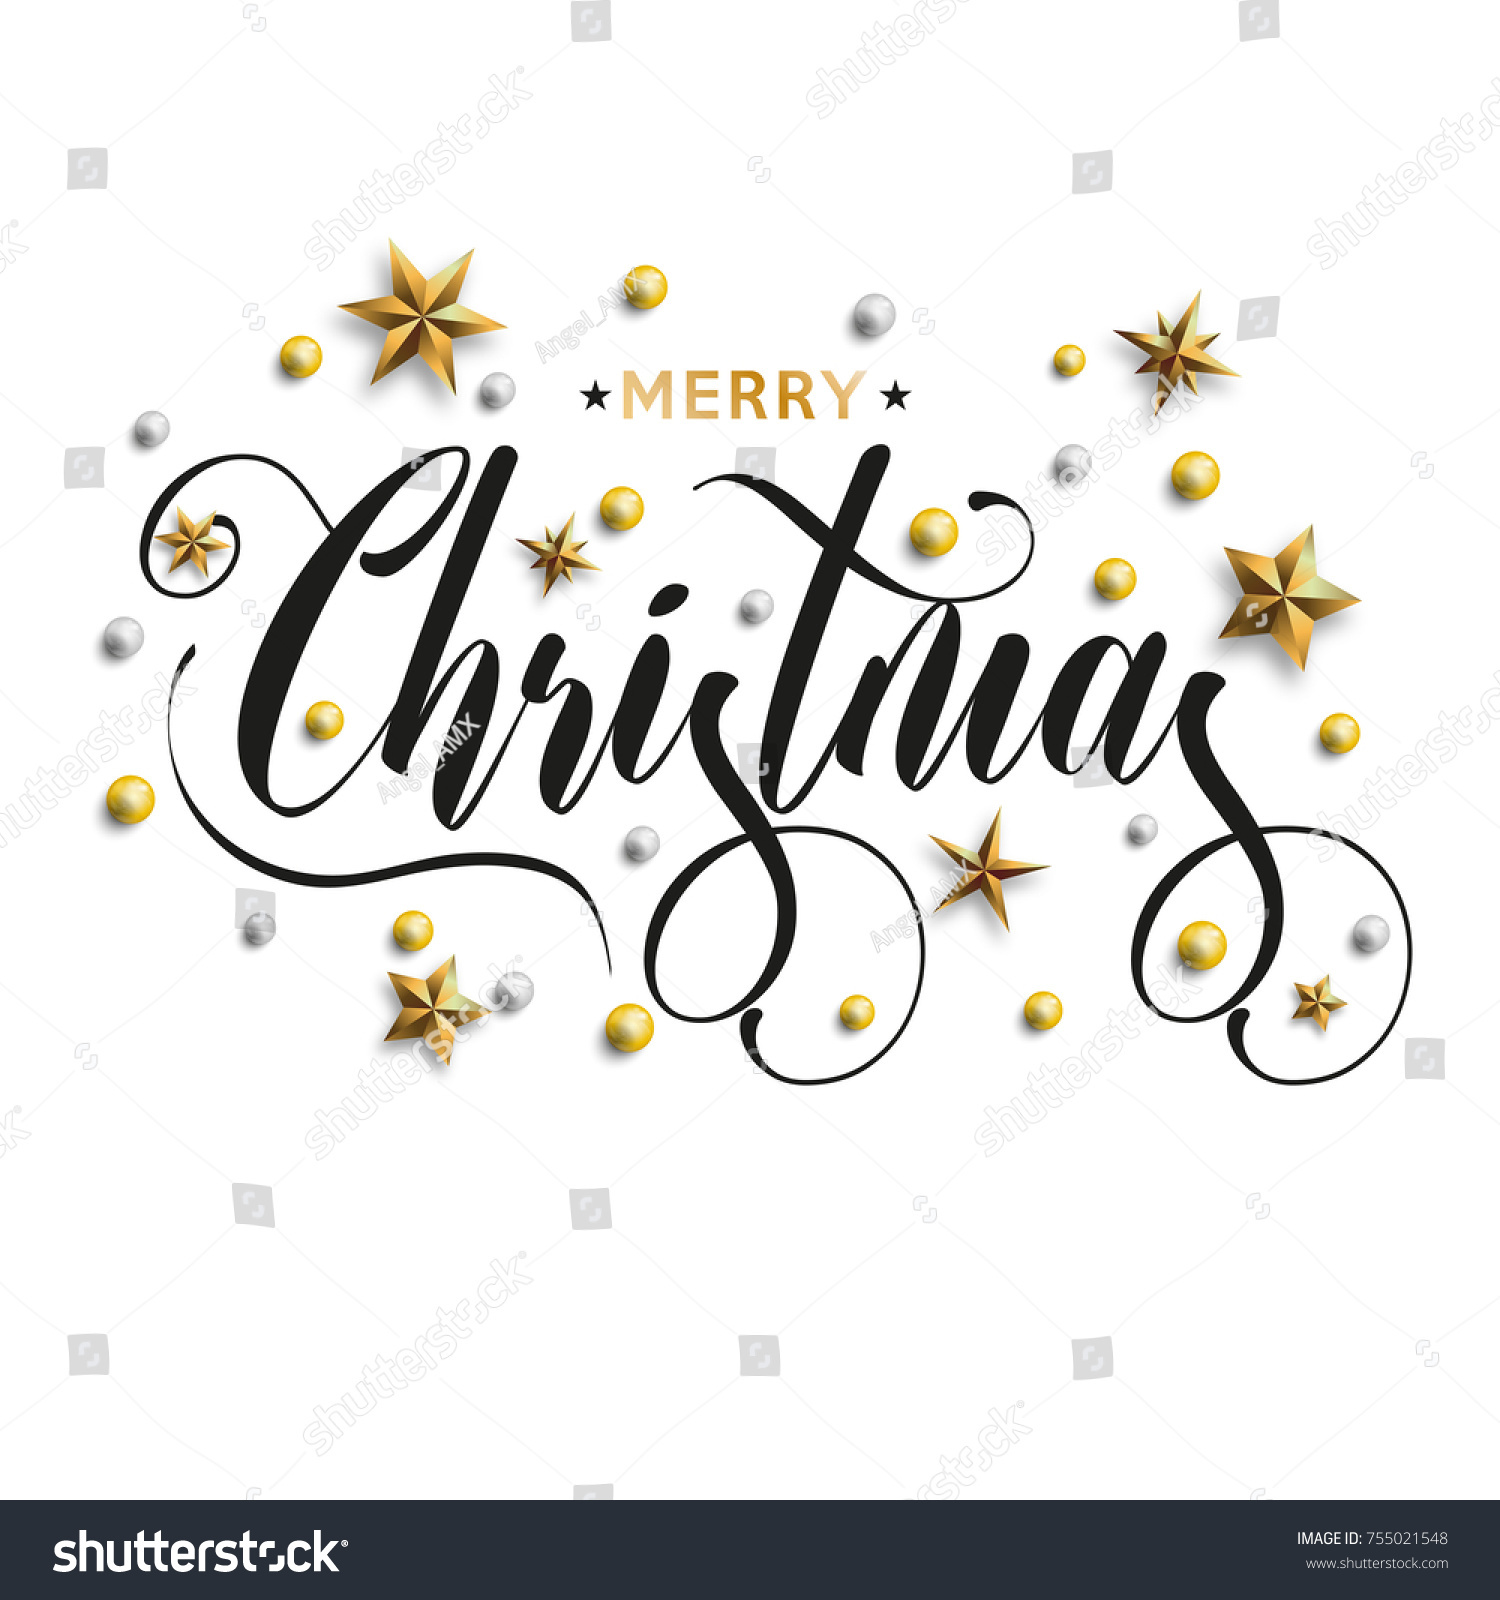 Merry Christmas inscription decorated with gold stars and beads. Vector illustration. #755021548